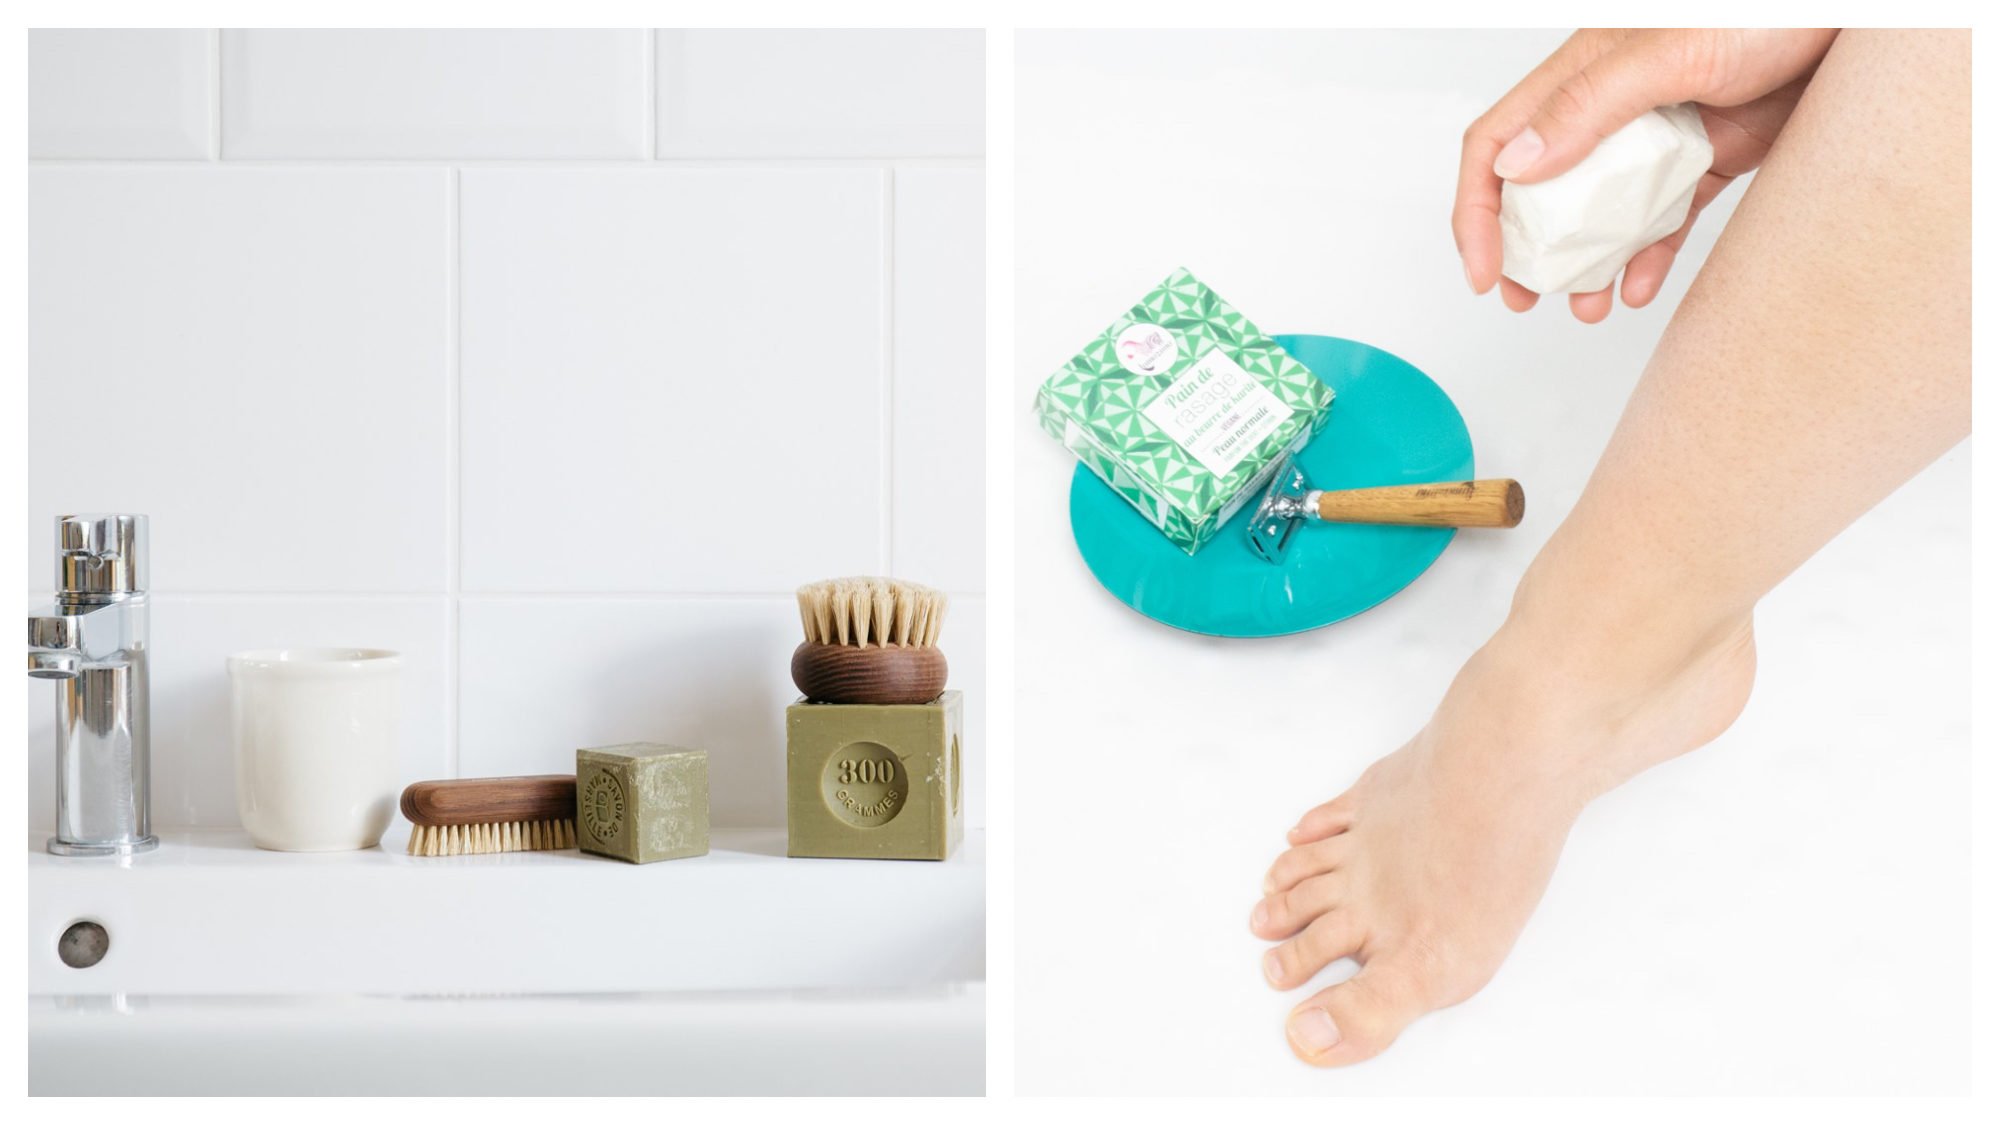 Olive Savon de Marseille block of soap and wooden bristle brushes in a white bathroom by Andrée Jardin (left). A woman's foot next to a Rasoir de Sureté razor with wooden handle (right).